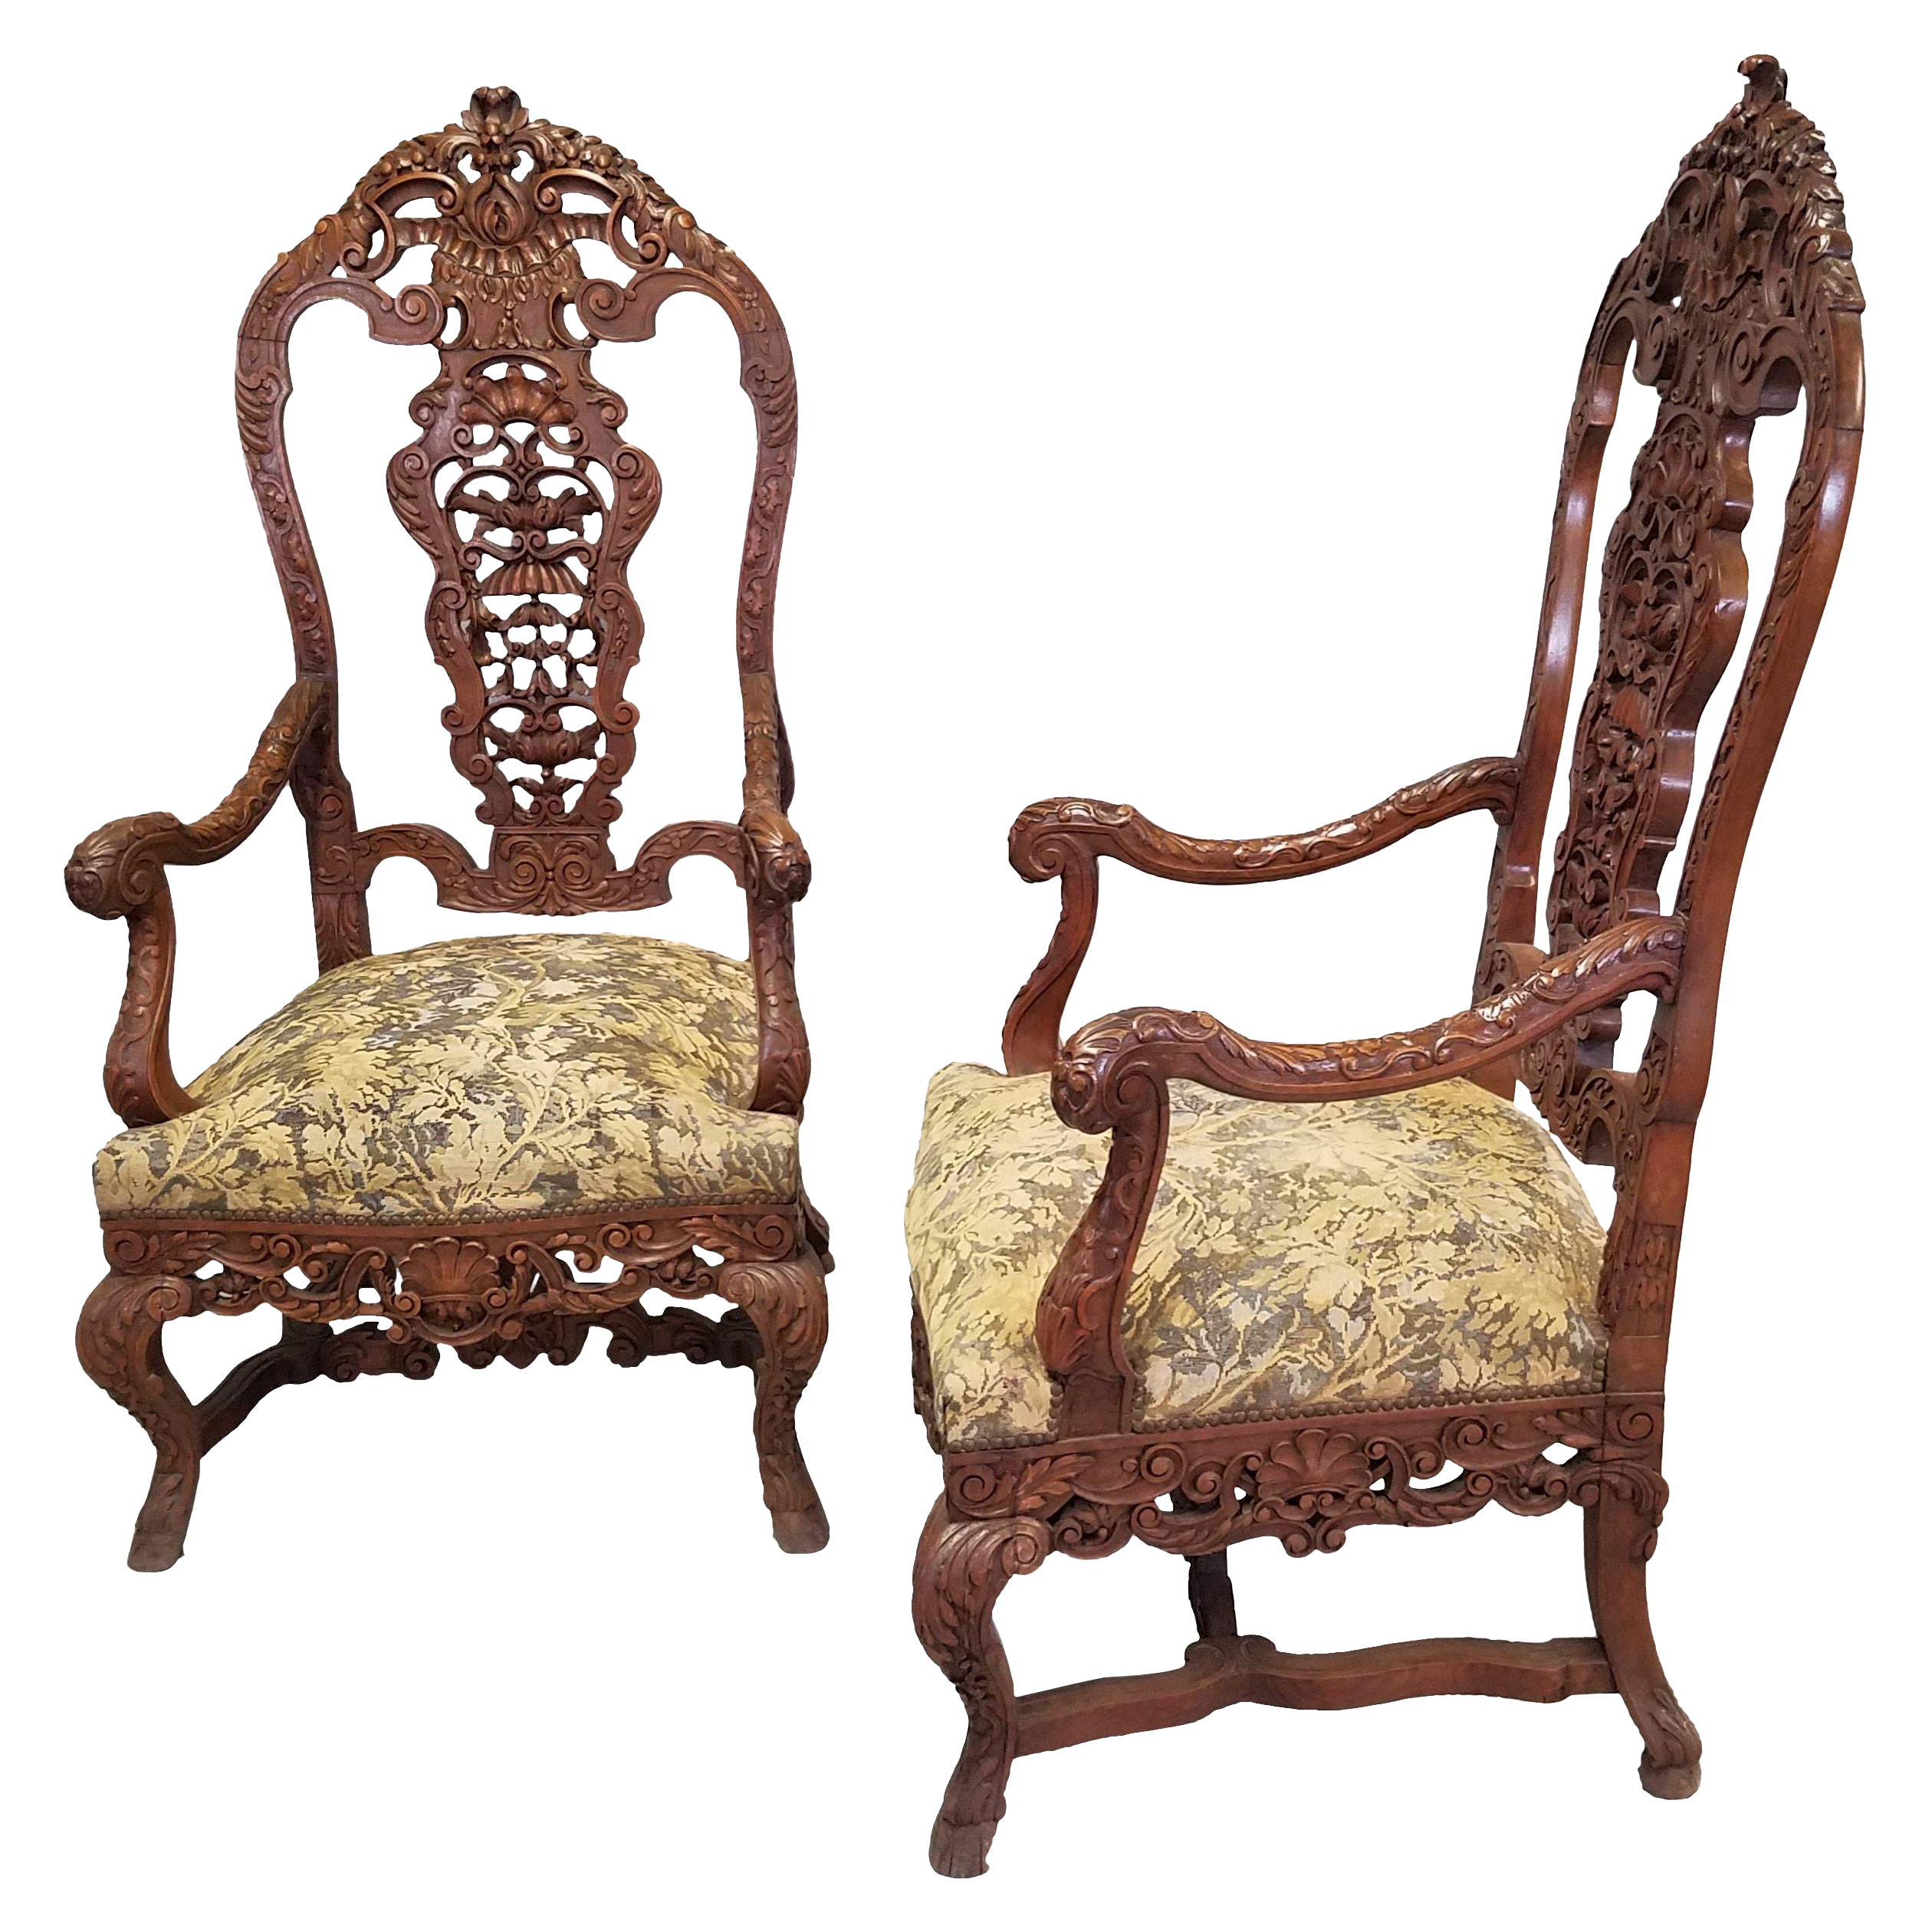 Walnut Louis XV Parlor Chair 1:12 scale